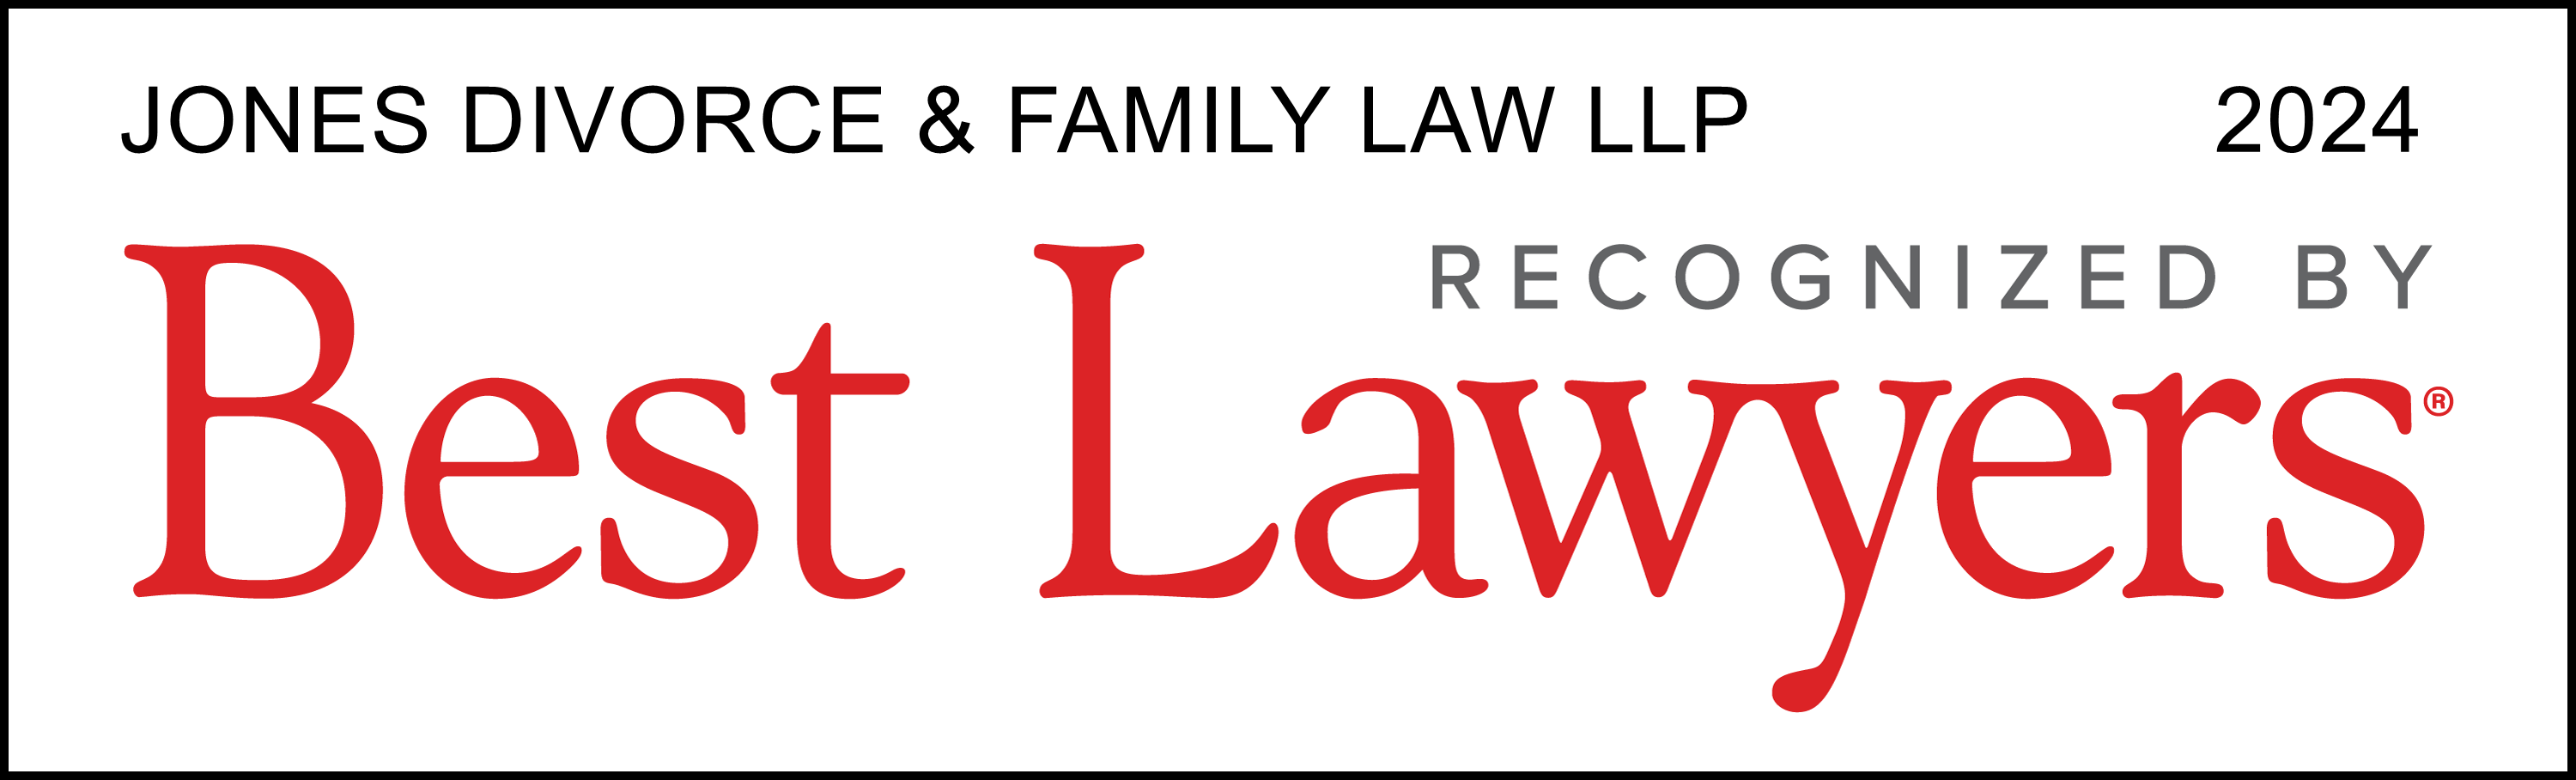 Jones Divorce And Family Law With Multiple Recognitions In The Best Lawyers In Canada™ 2024 Edition